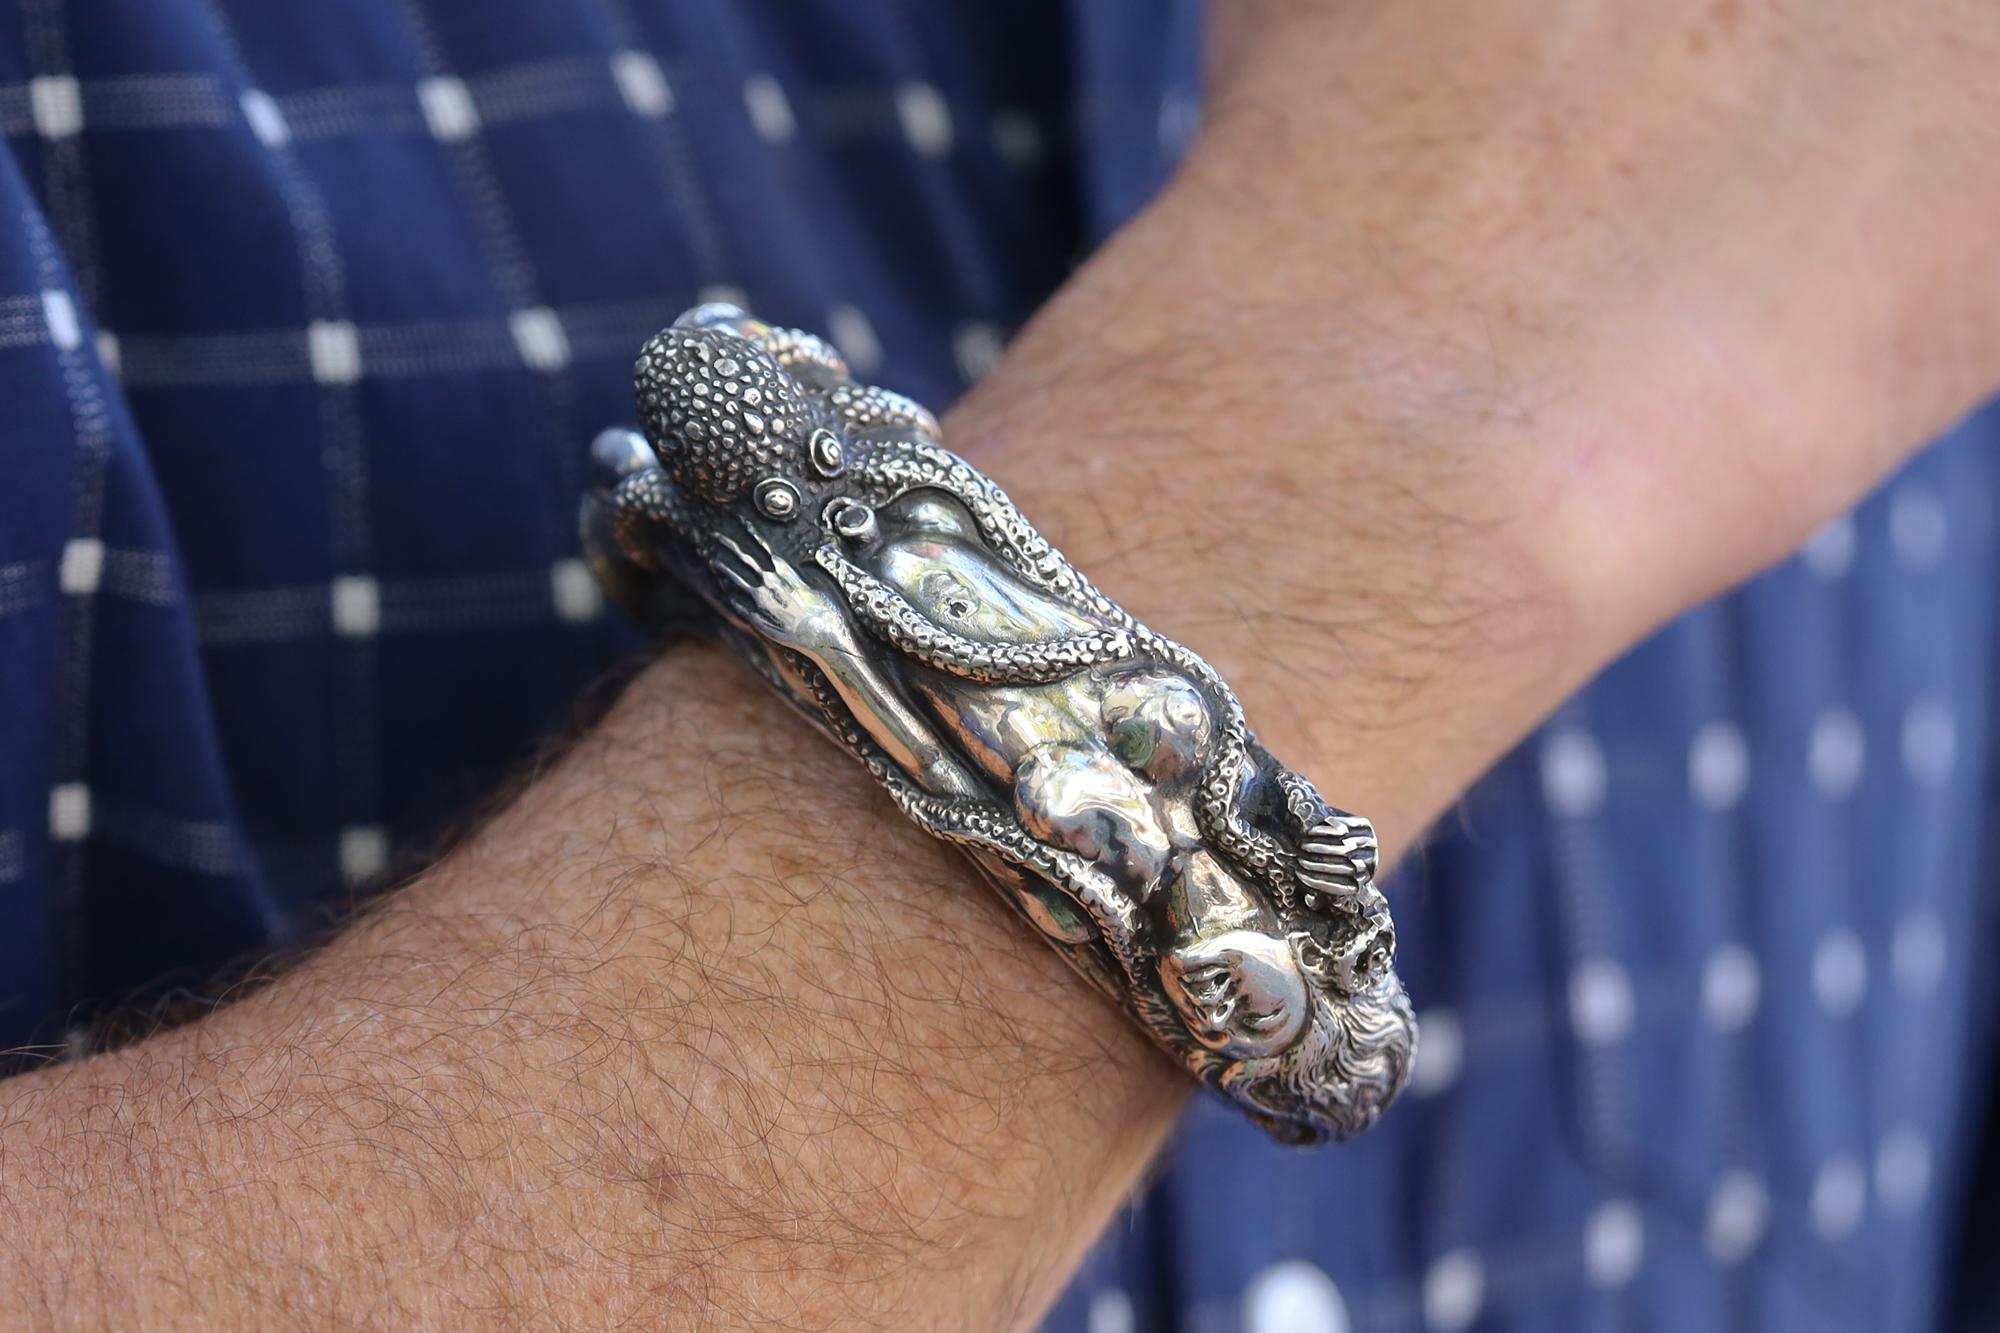 The Dream Of The Fisherman's Wife Cuff, sized for a mens wrist. This very interesting bracelet is themed after an early 19th Century Japanese erotic or shunga print by Hokusai. A large and dynamic bracelet that certainly will draw curious stares.